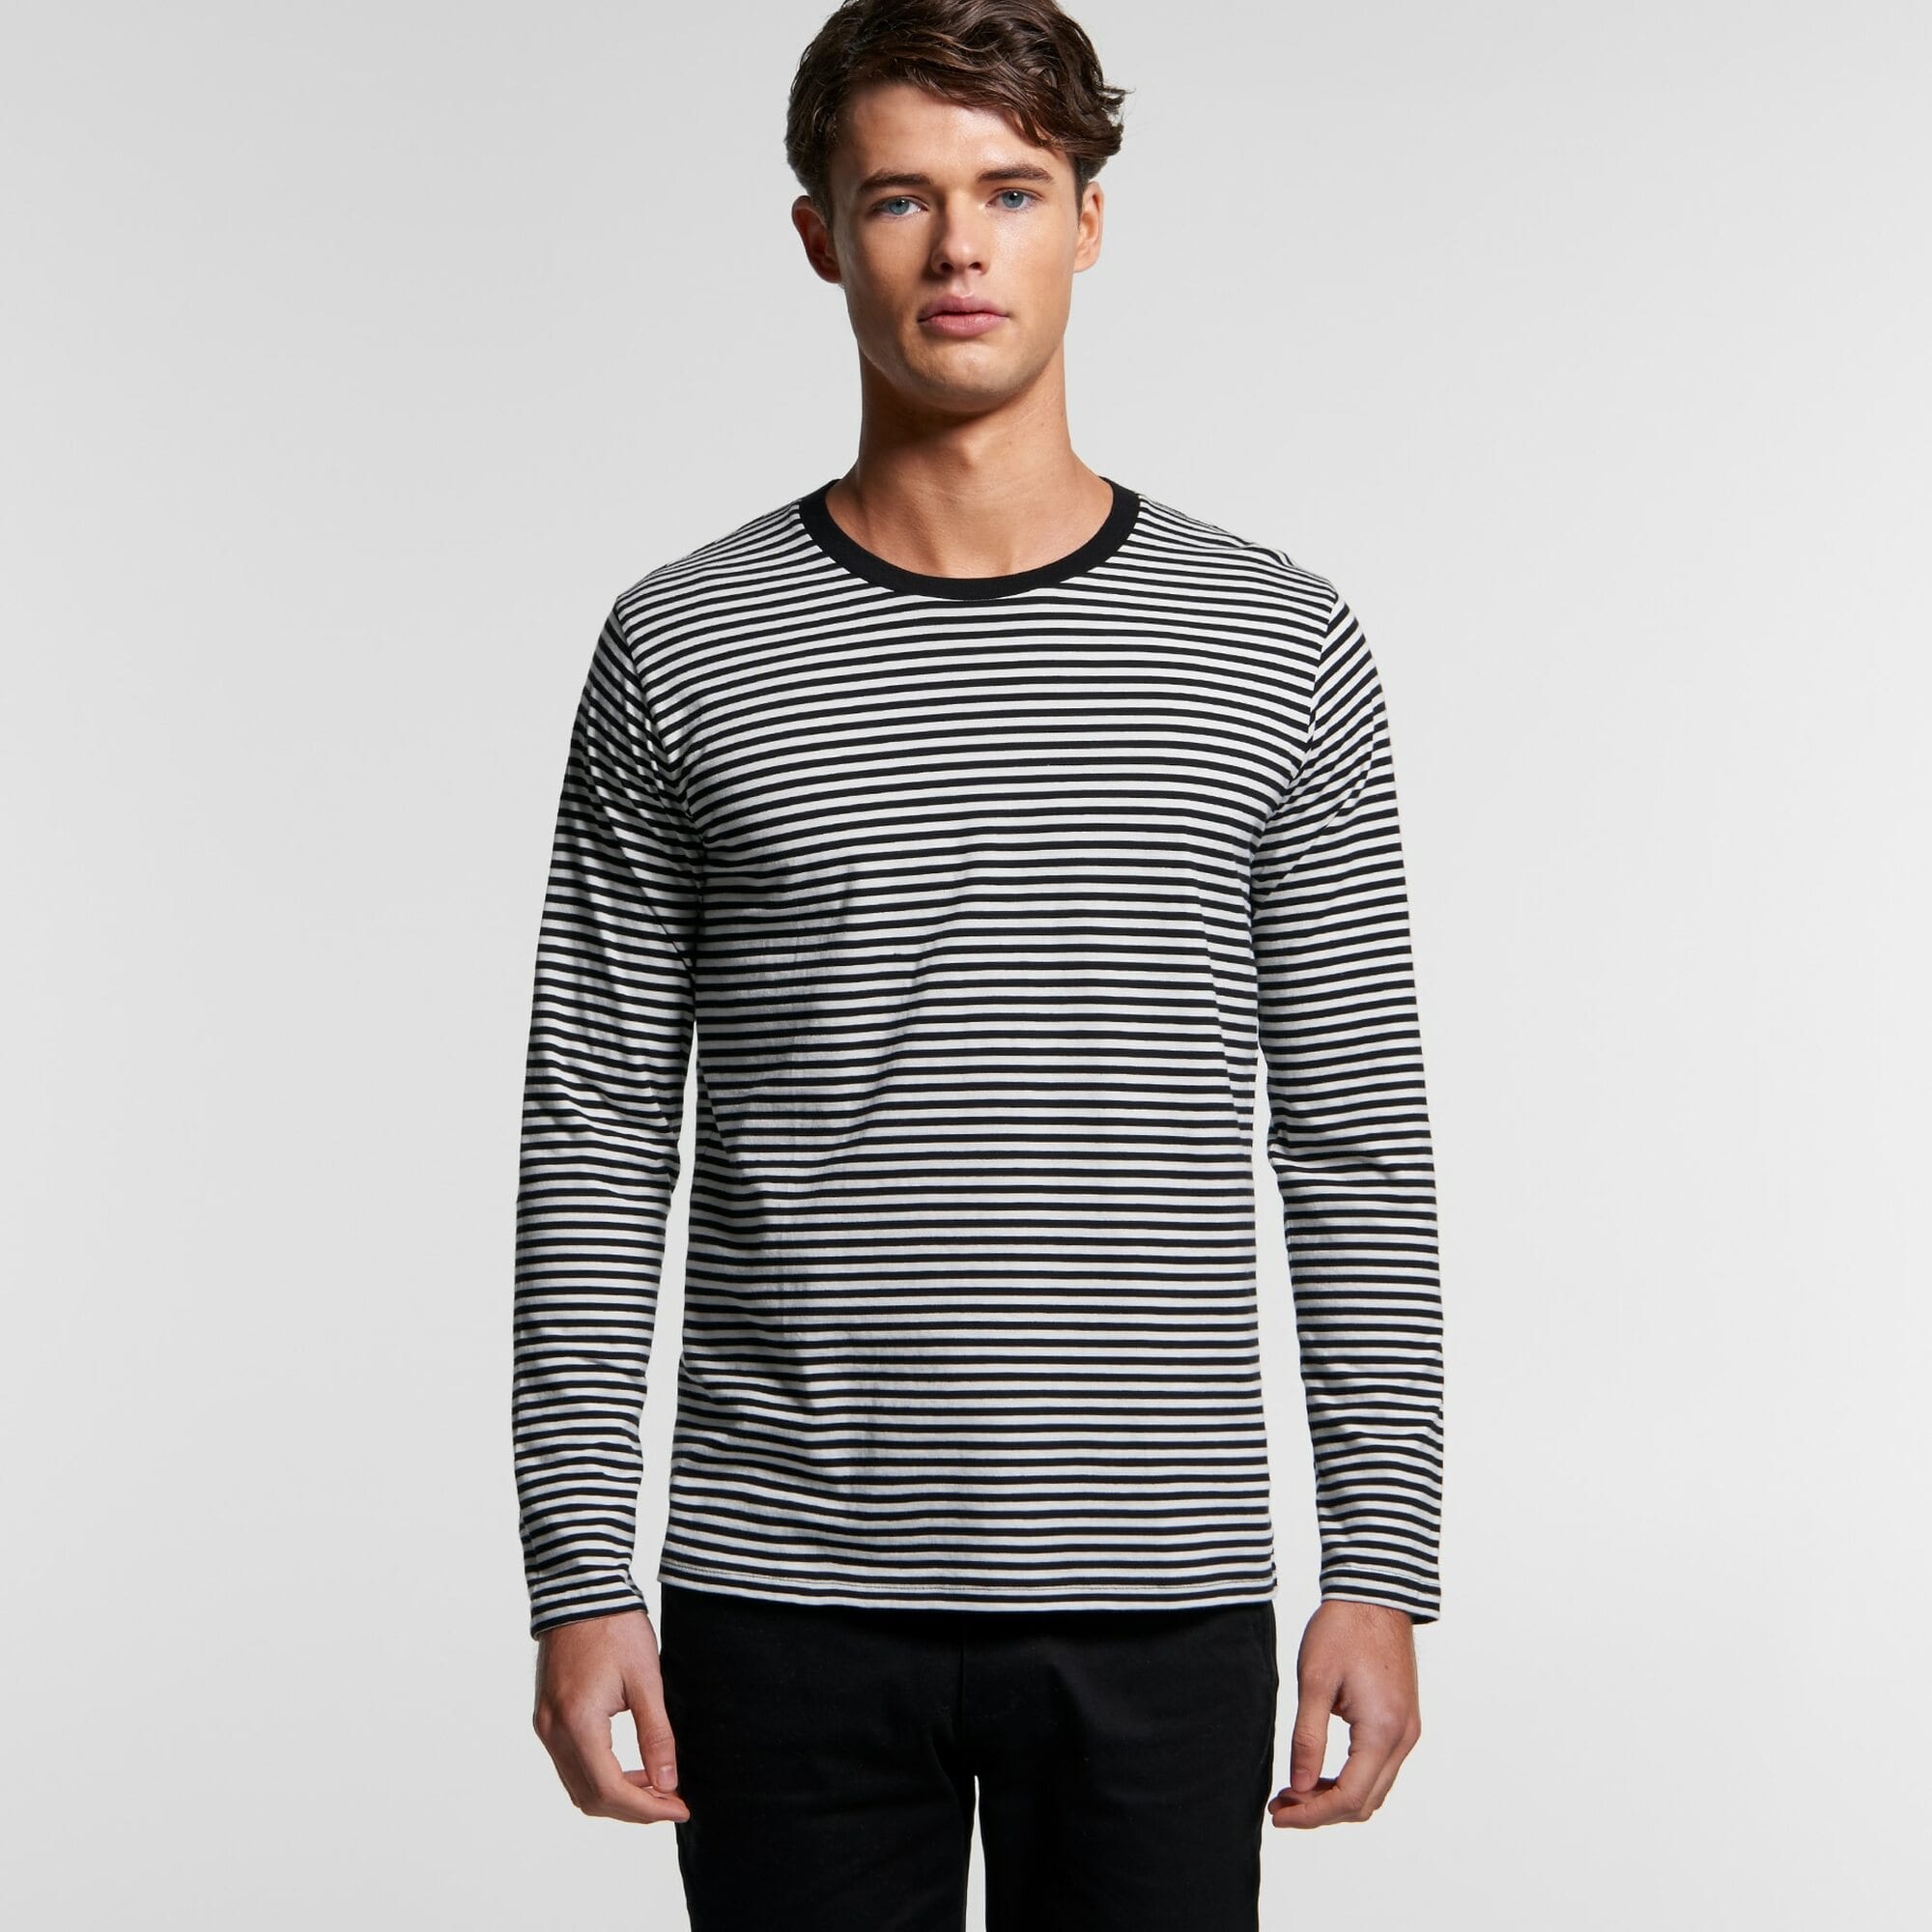 5061_BOWERY_STRIPE_LS_TEE_FRONT__70759.1586251729